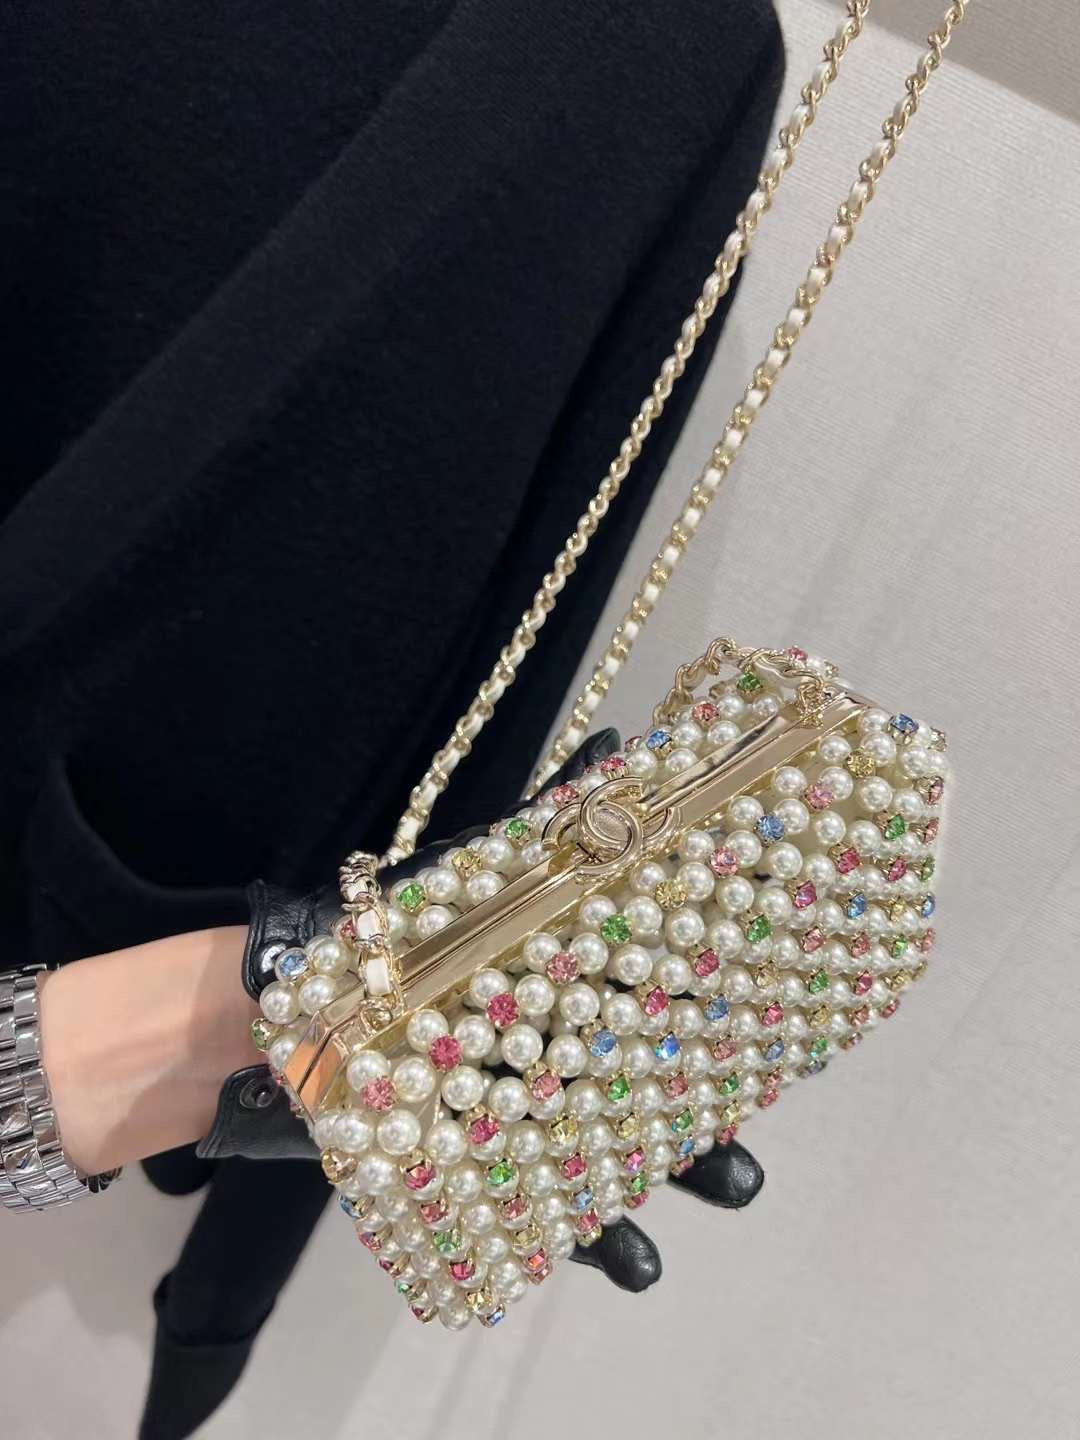 Chanel 23 Bag with studs and pearls